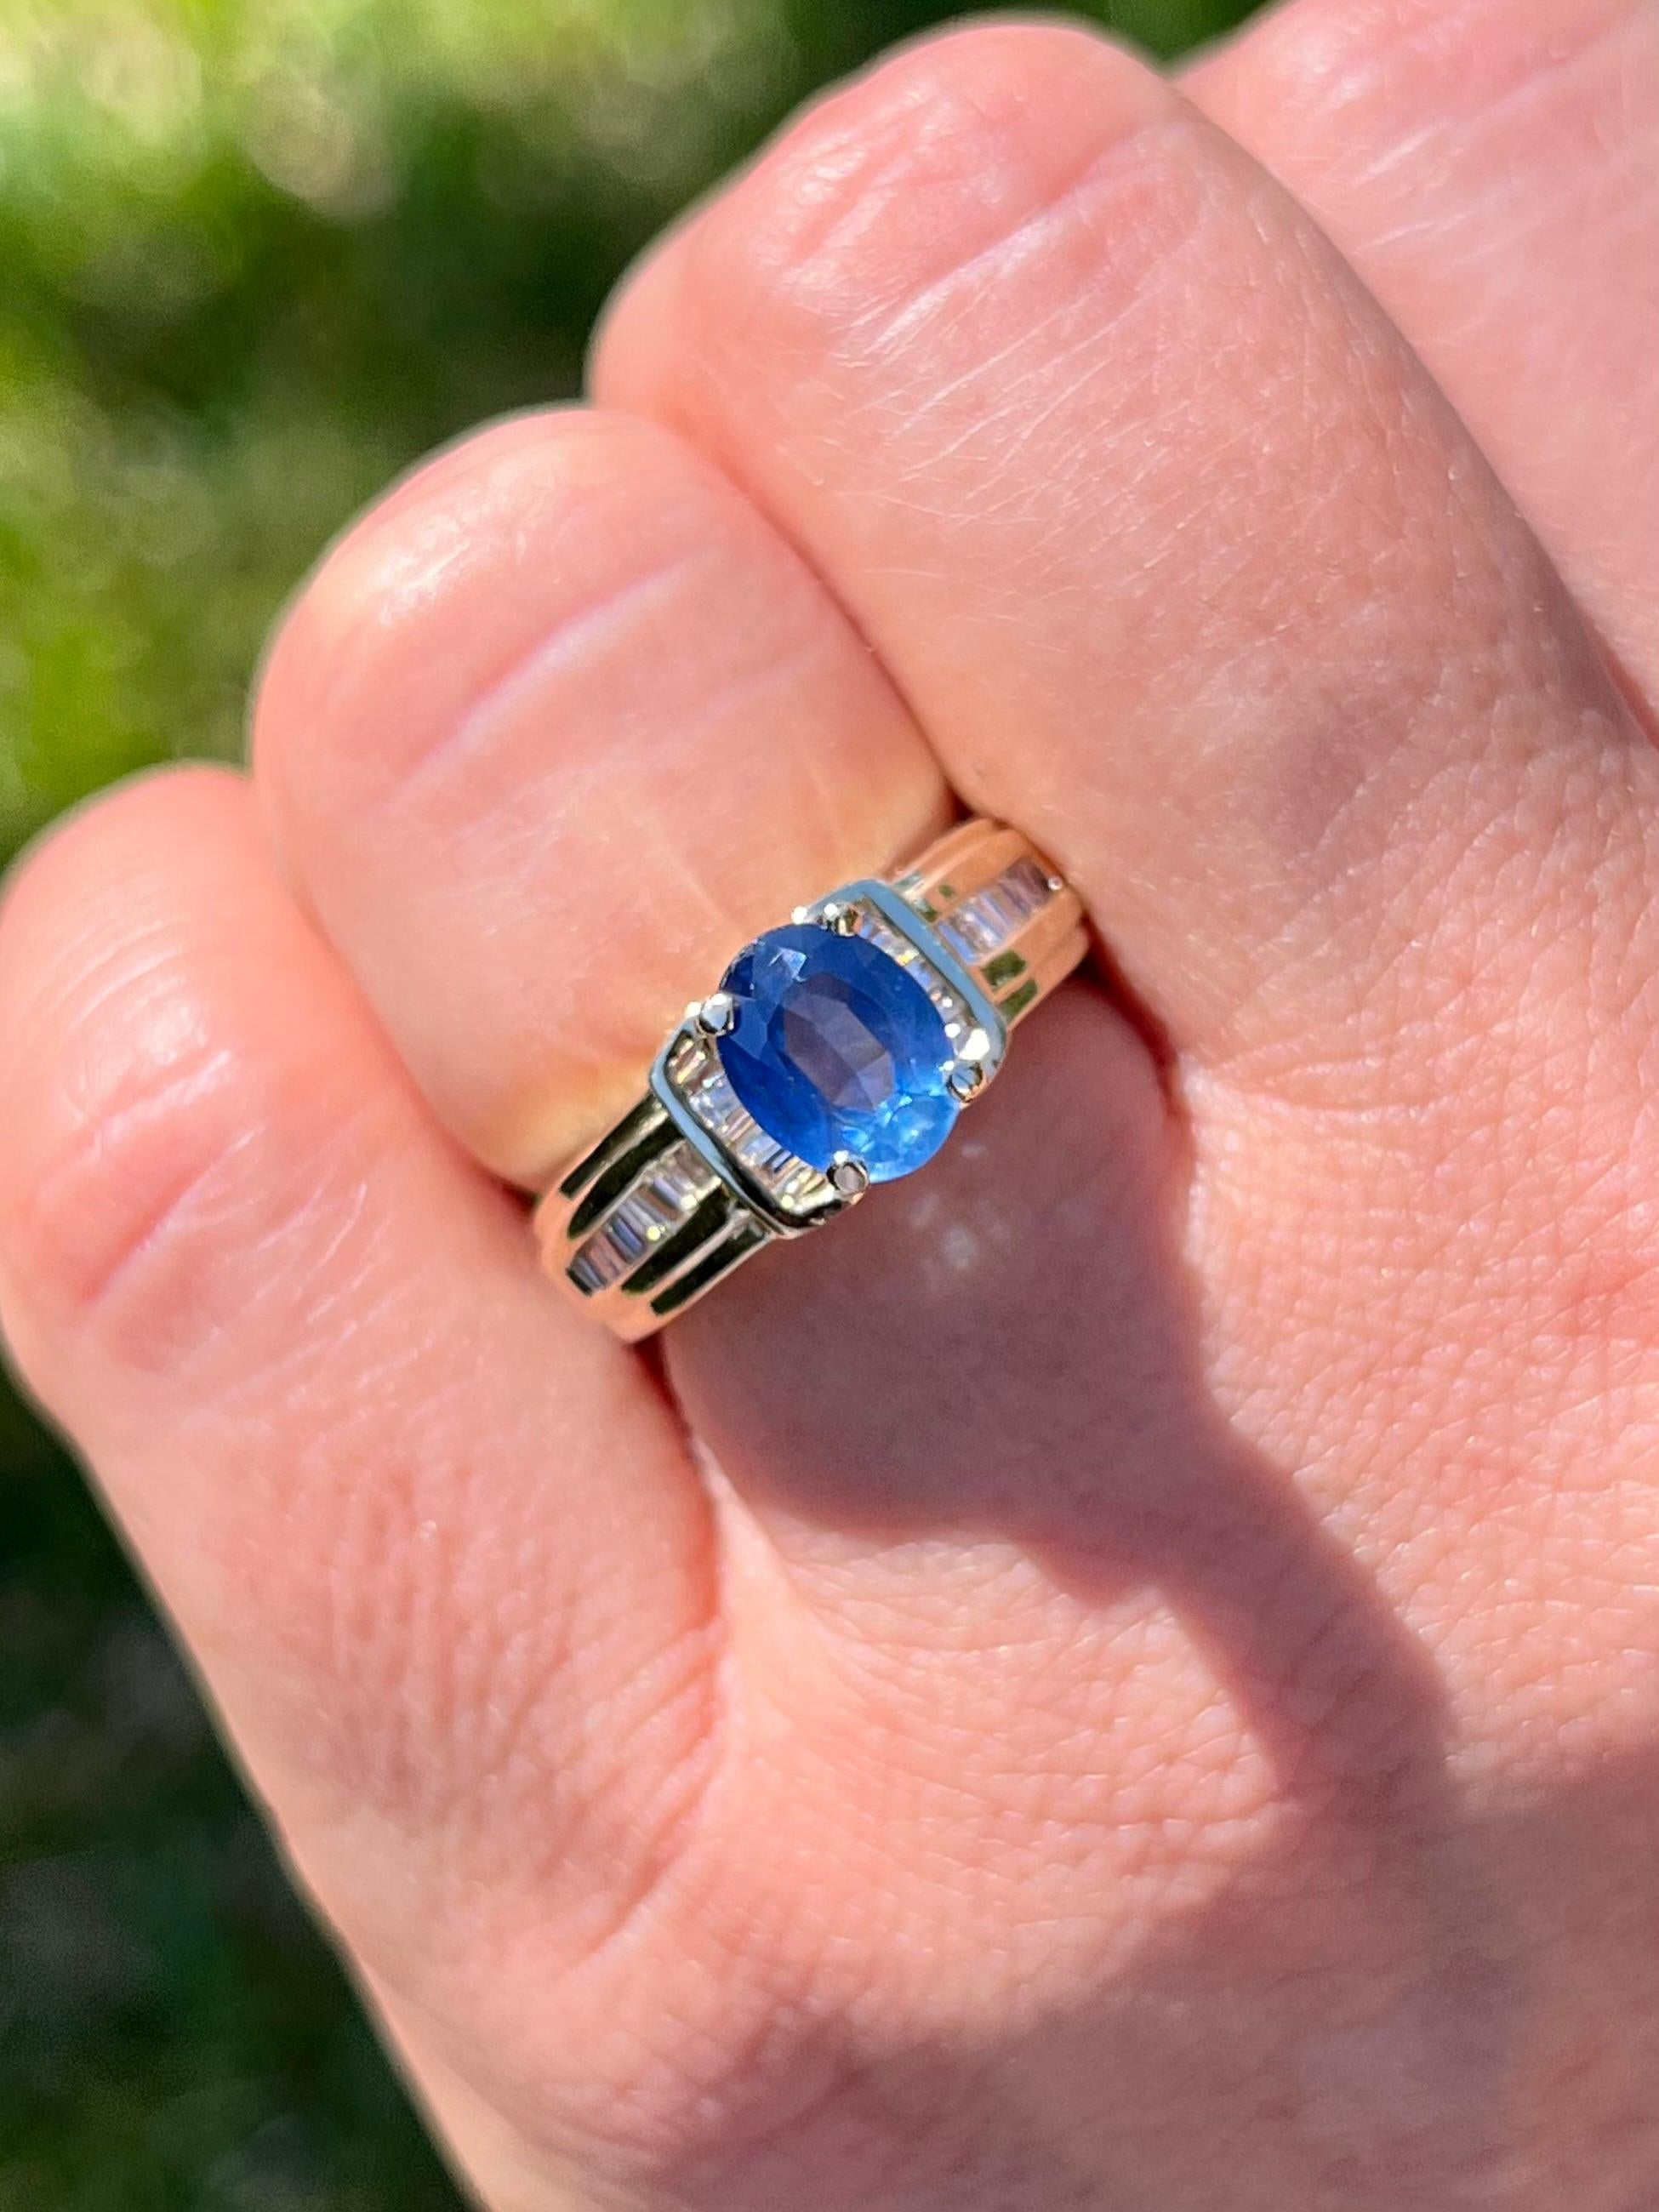 1.22-carat oval cut Blue Sapphire set with baguette-cut diamond accents in a 14k yellow gold ring. The baguette-cut diamond side stones serve as the perfect contrast to the light Blue Sapphire center stone. 

Polished finish for a long-lasting